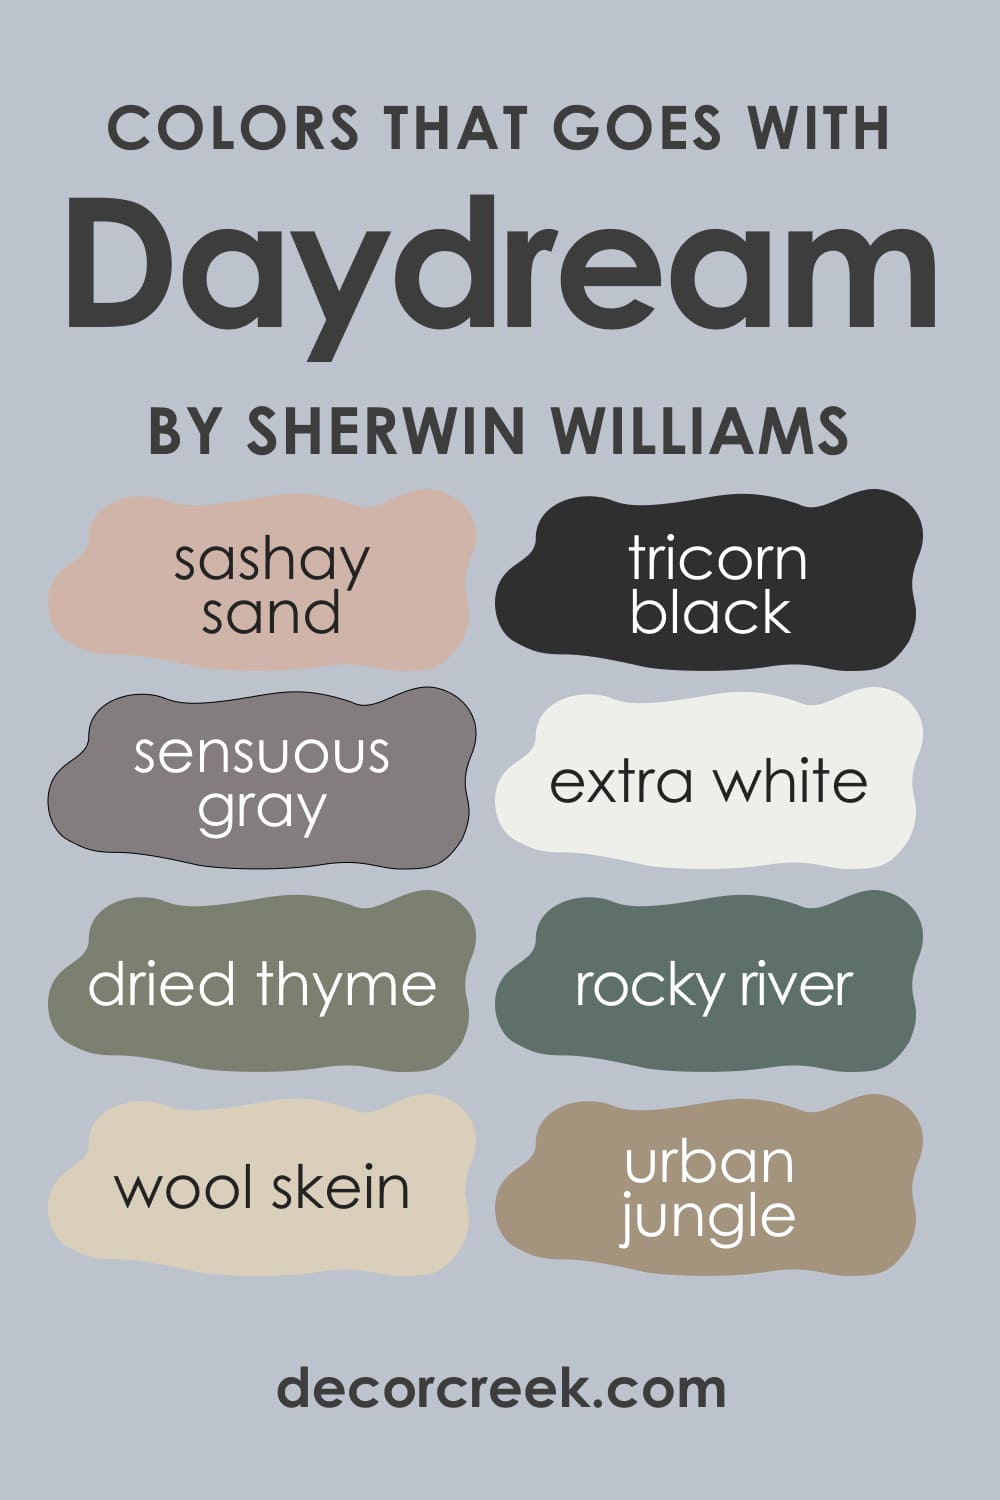 Colors That Go With SW-6541 Daydream